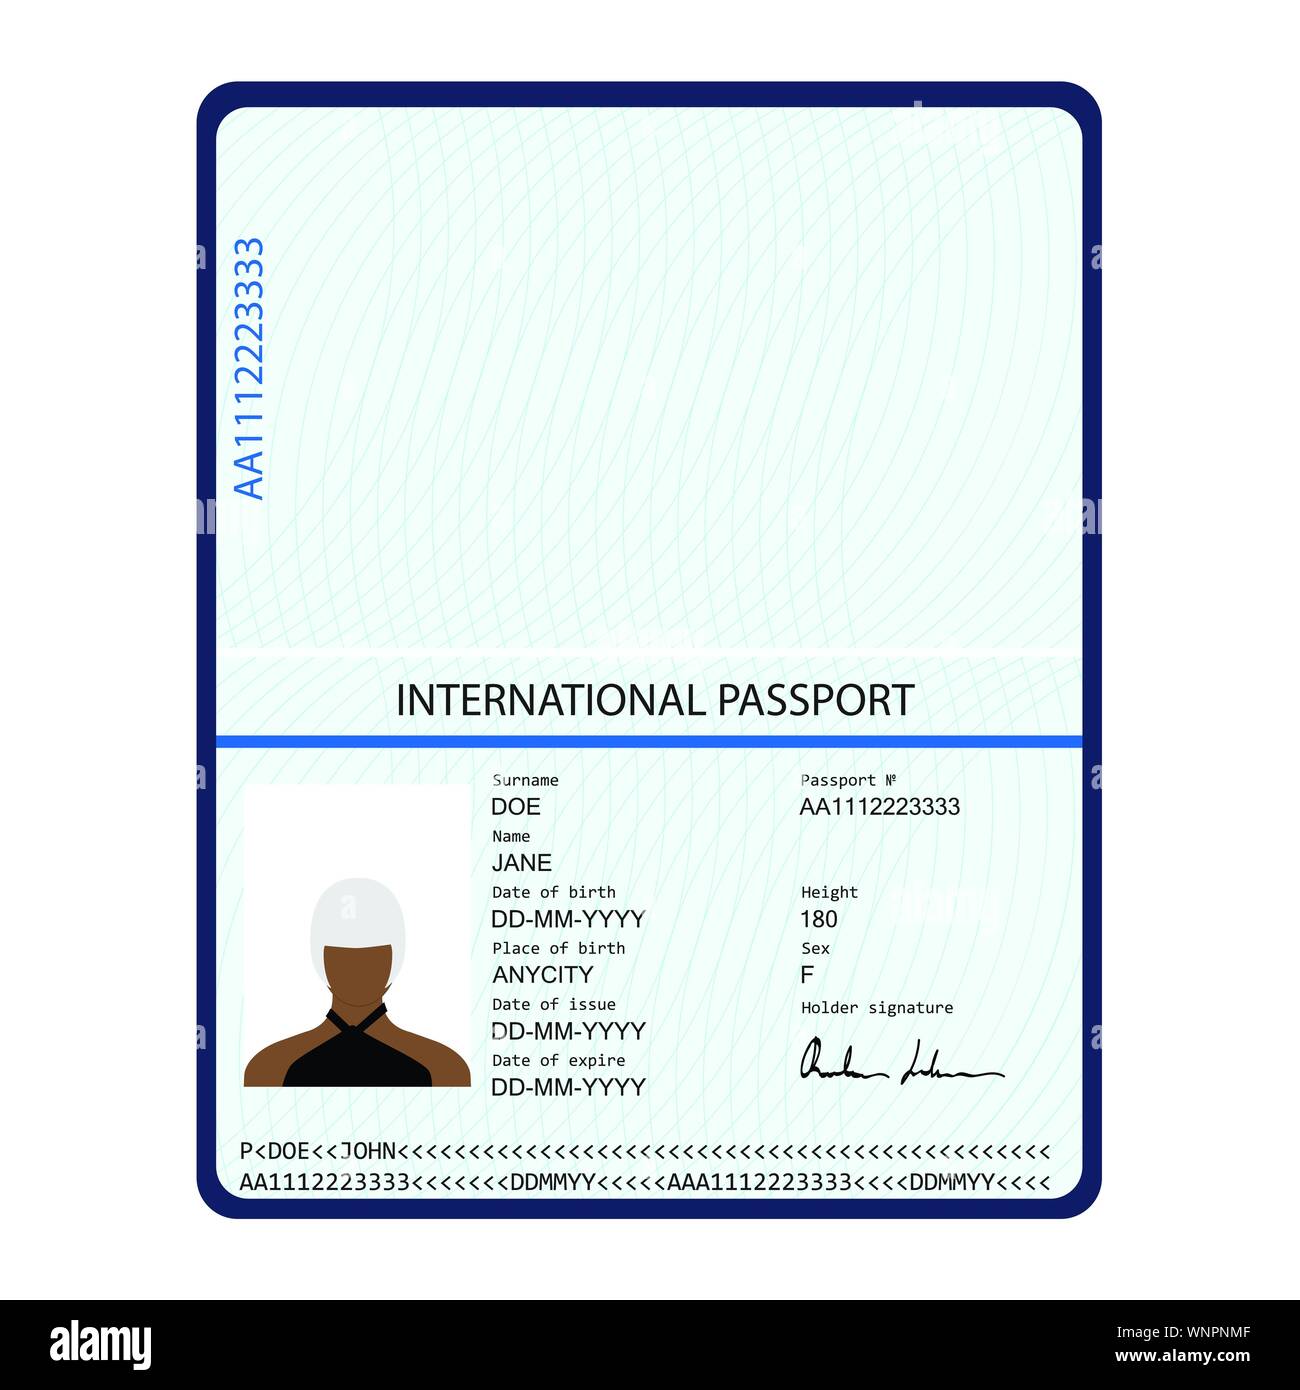 International biometric passport cover page. Blue and red top page